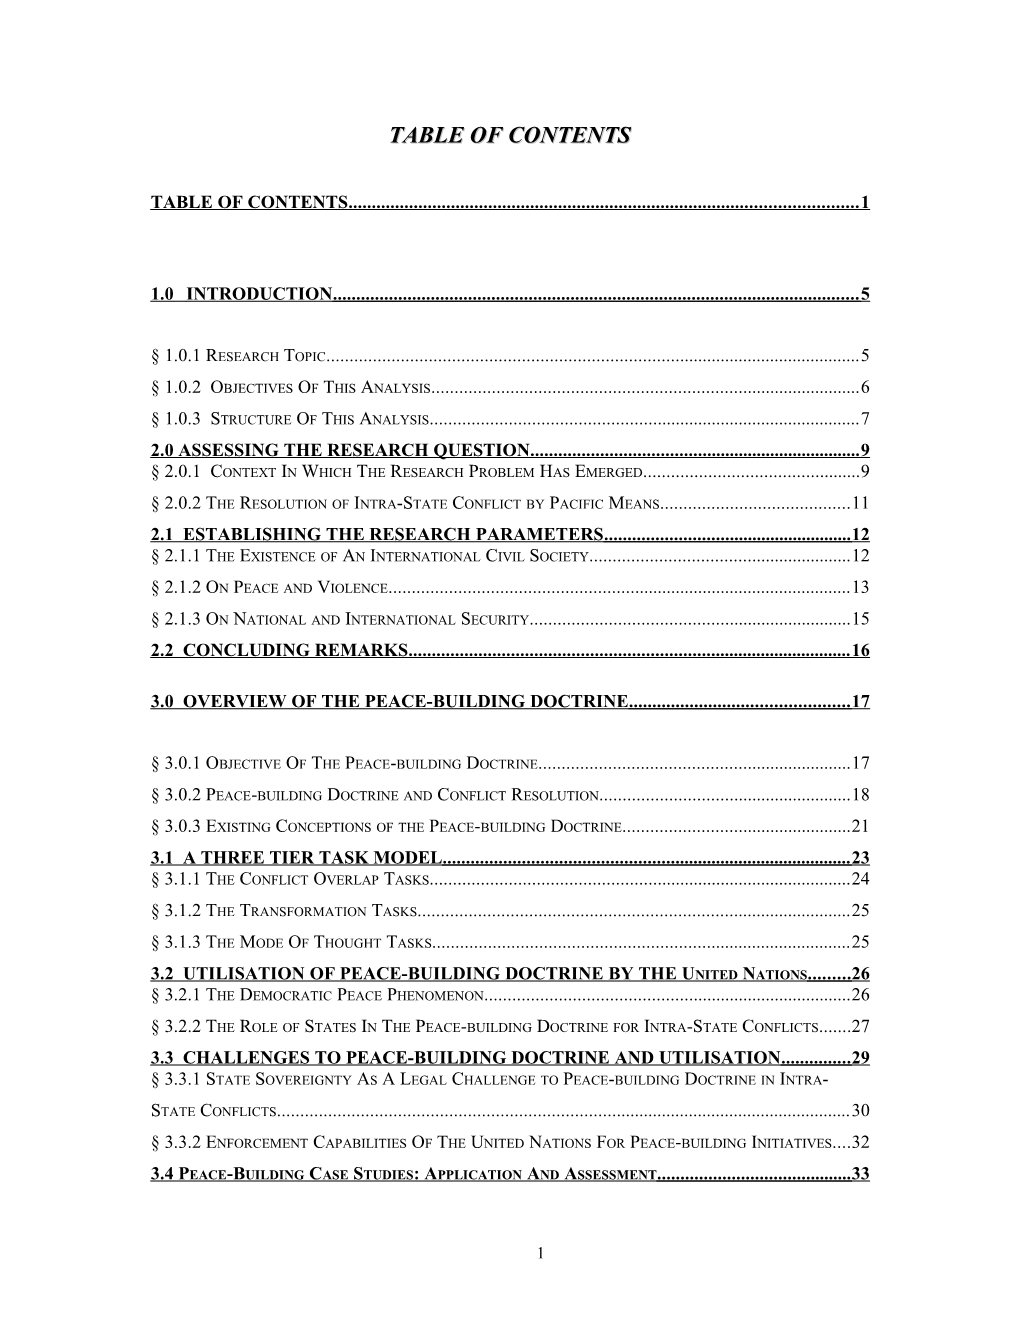 Table of Contents s300